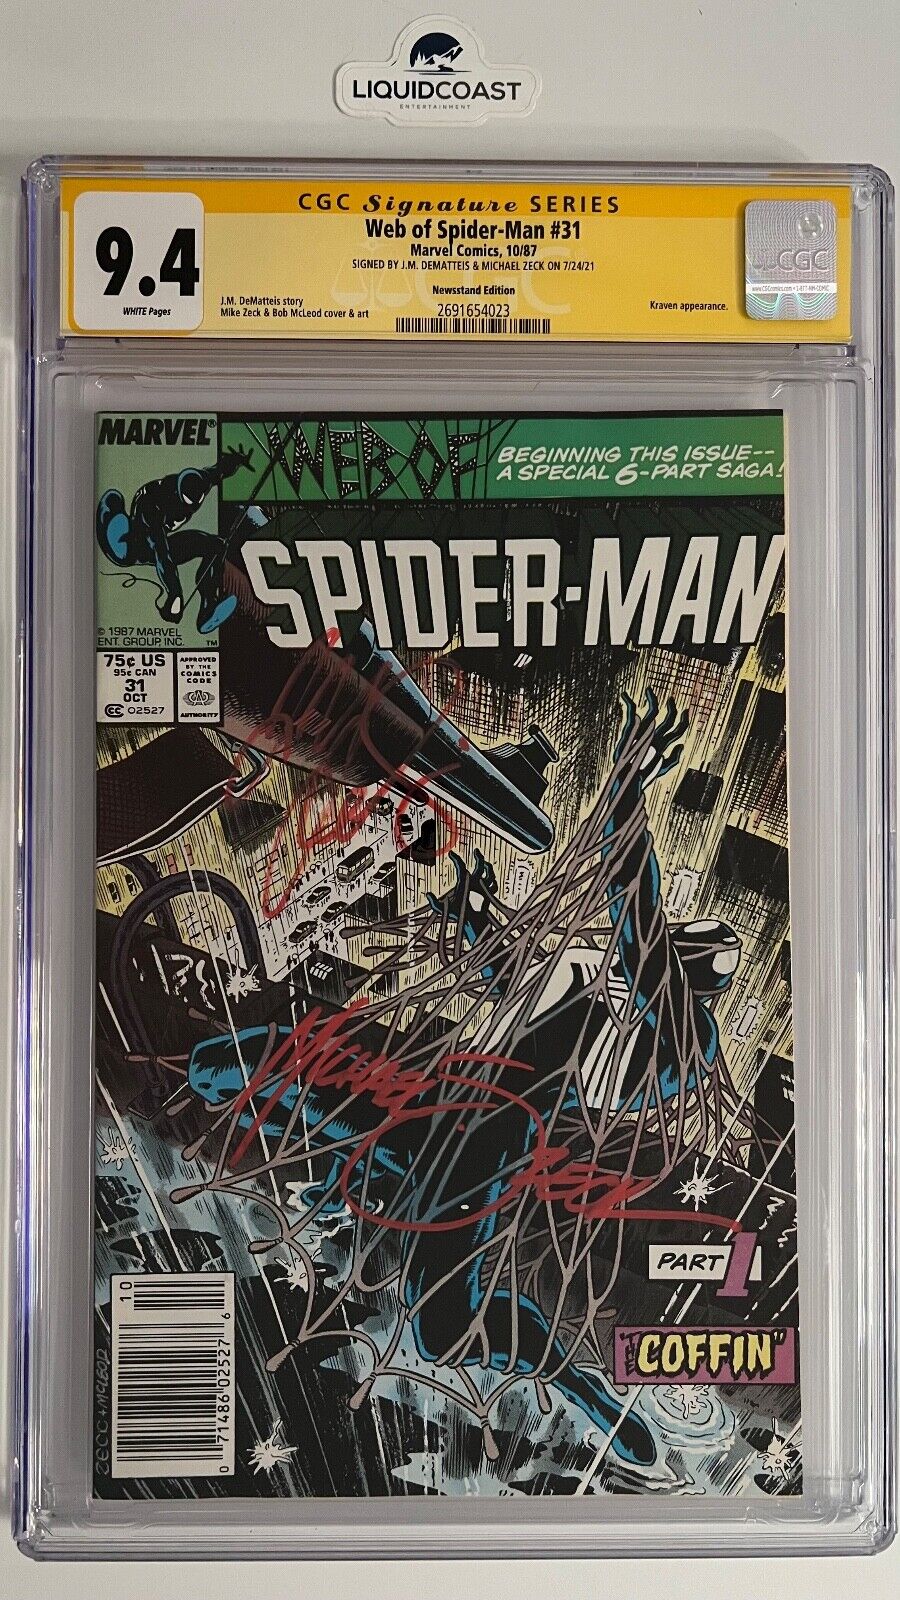 Web of Spider-Man #31 SS CGC 9.4 SIGNED BY J.M. DEMATTEIS & MICHAEL ZECK